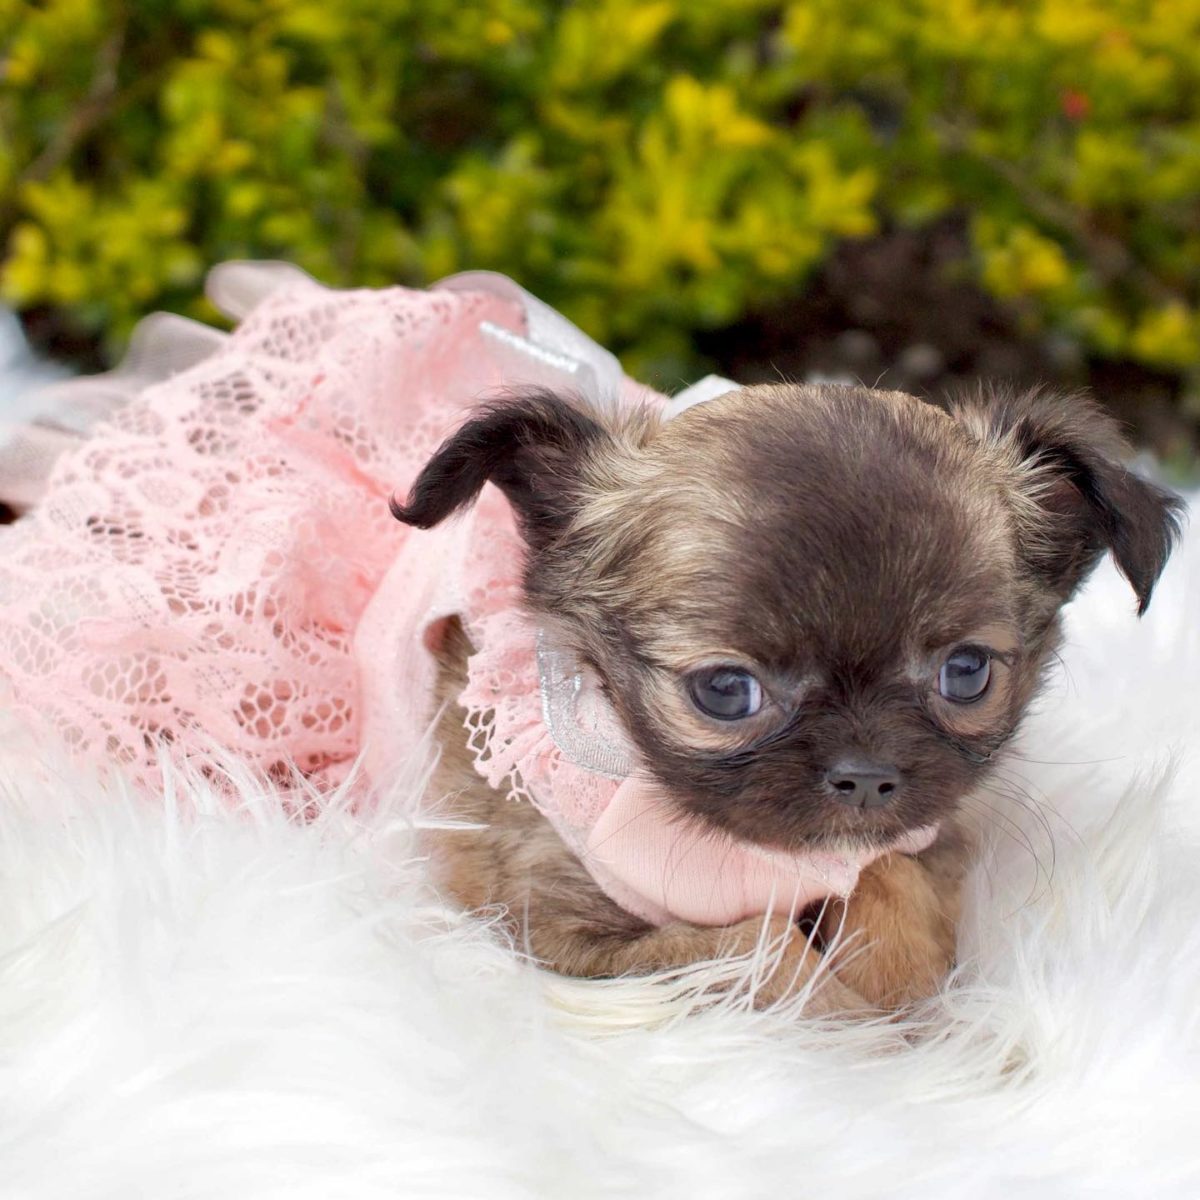 baby chihuahua photos that are too cute for words